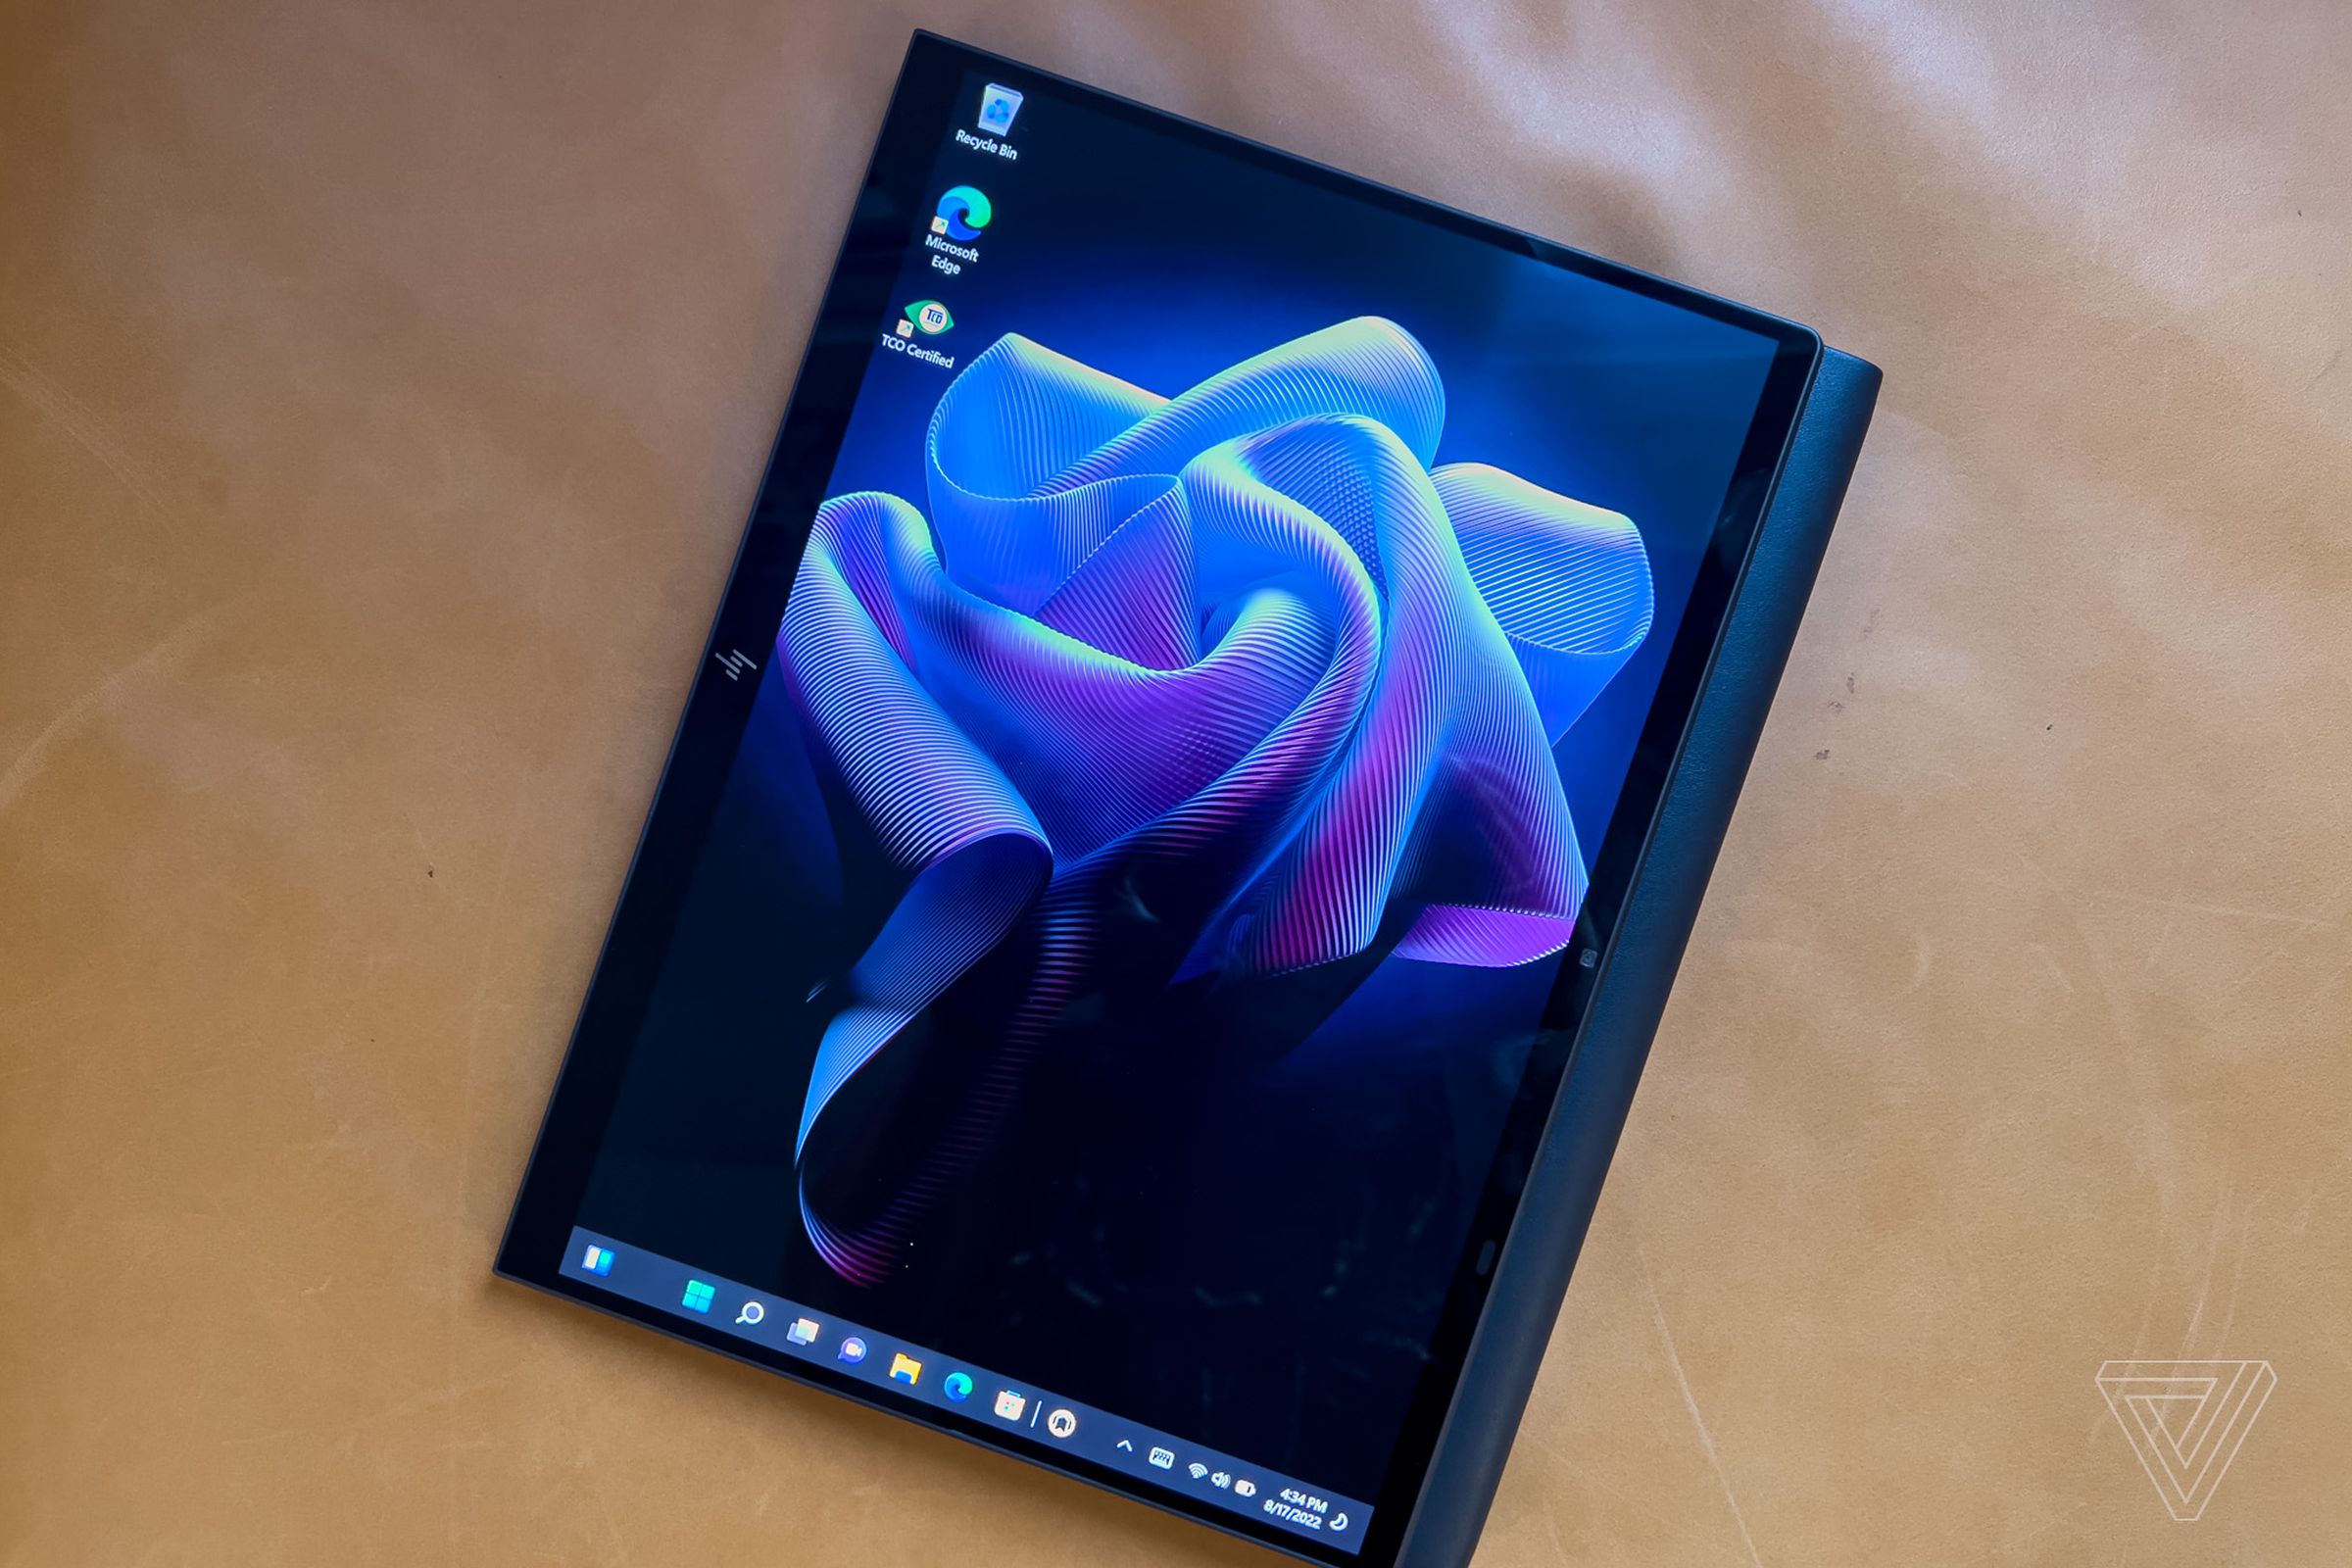 The HP Dragonfly Folio G3 in tablet mode seen from above. Screen displays a purple flower on a black background.